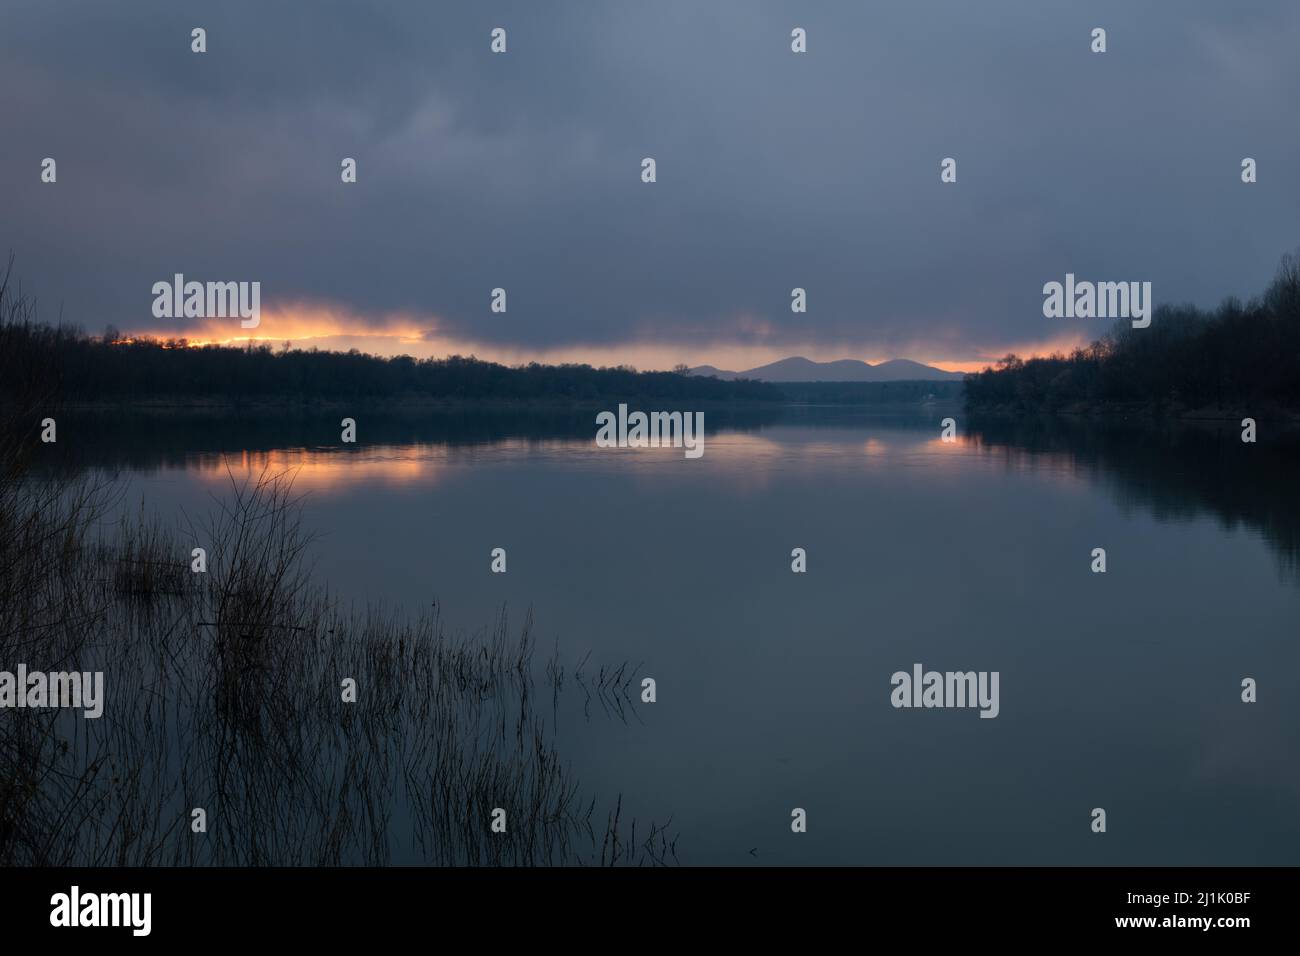 Landscape of River Sava and Motajica mountain with dark clouds at dusk Stock Photo